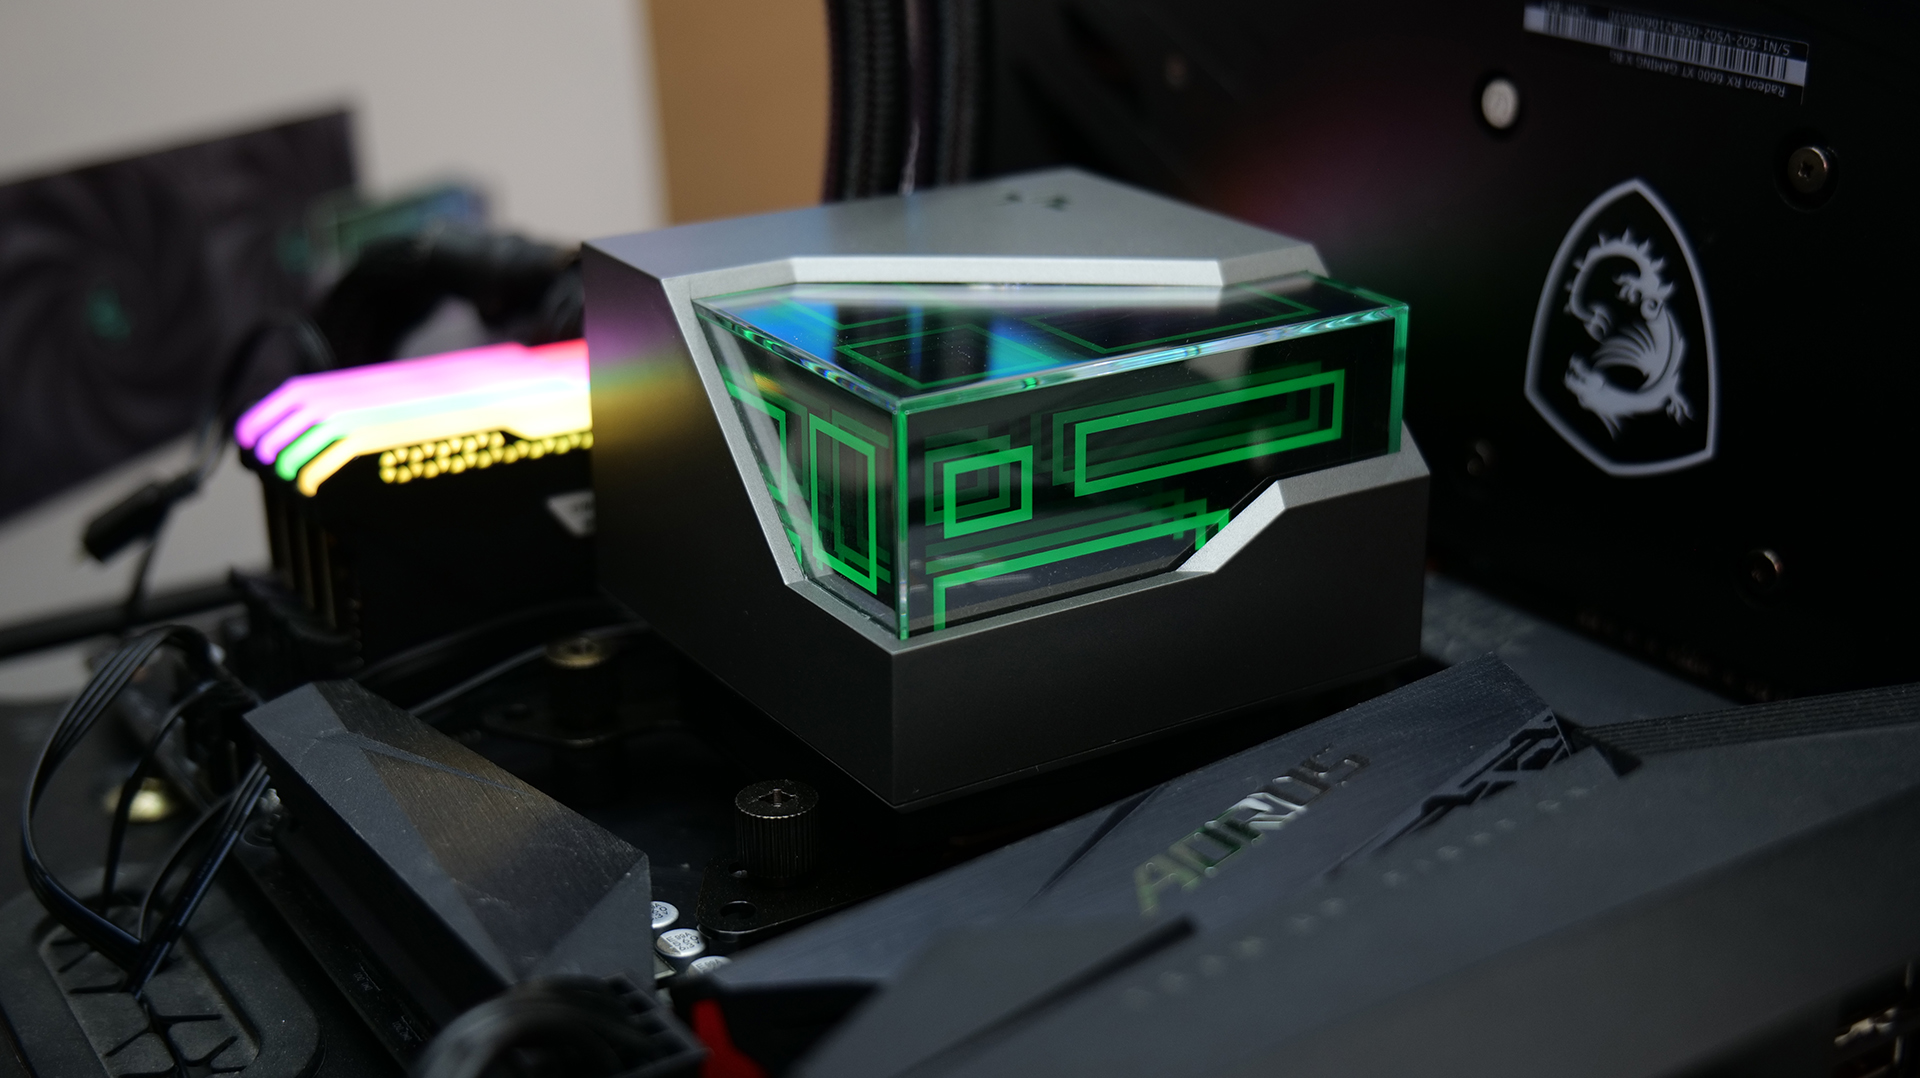 DeepCool LT720 in test - liquid cooling with Infinity effect!